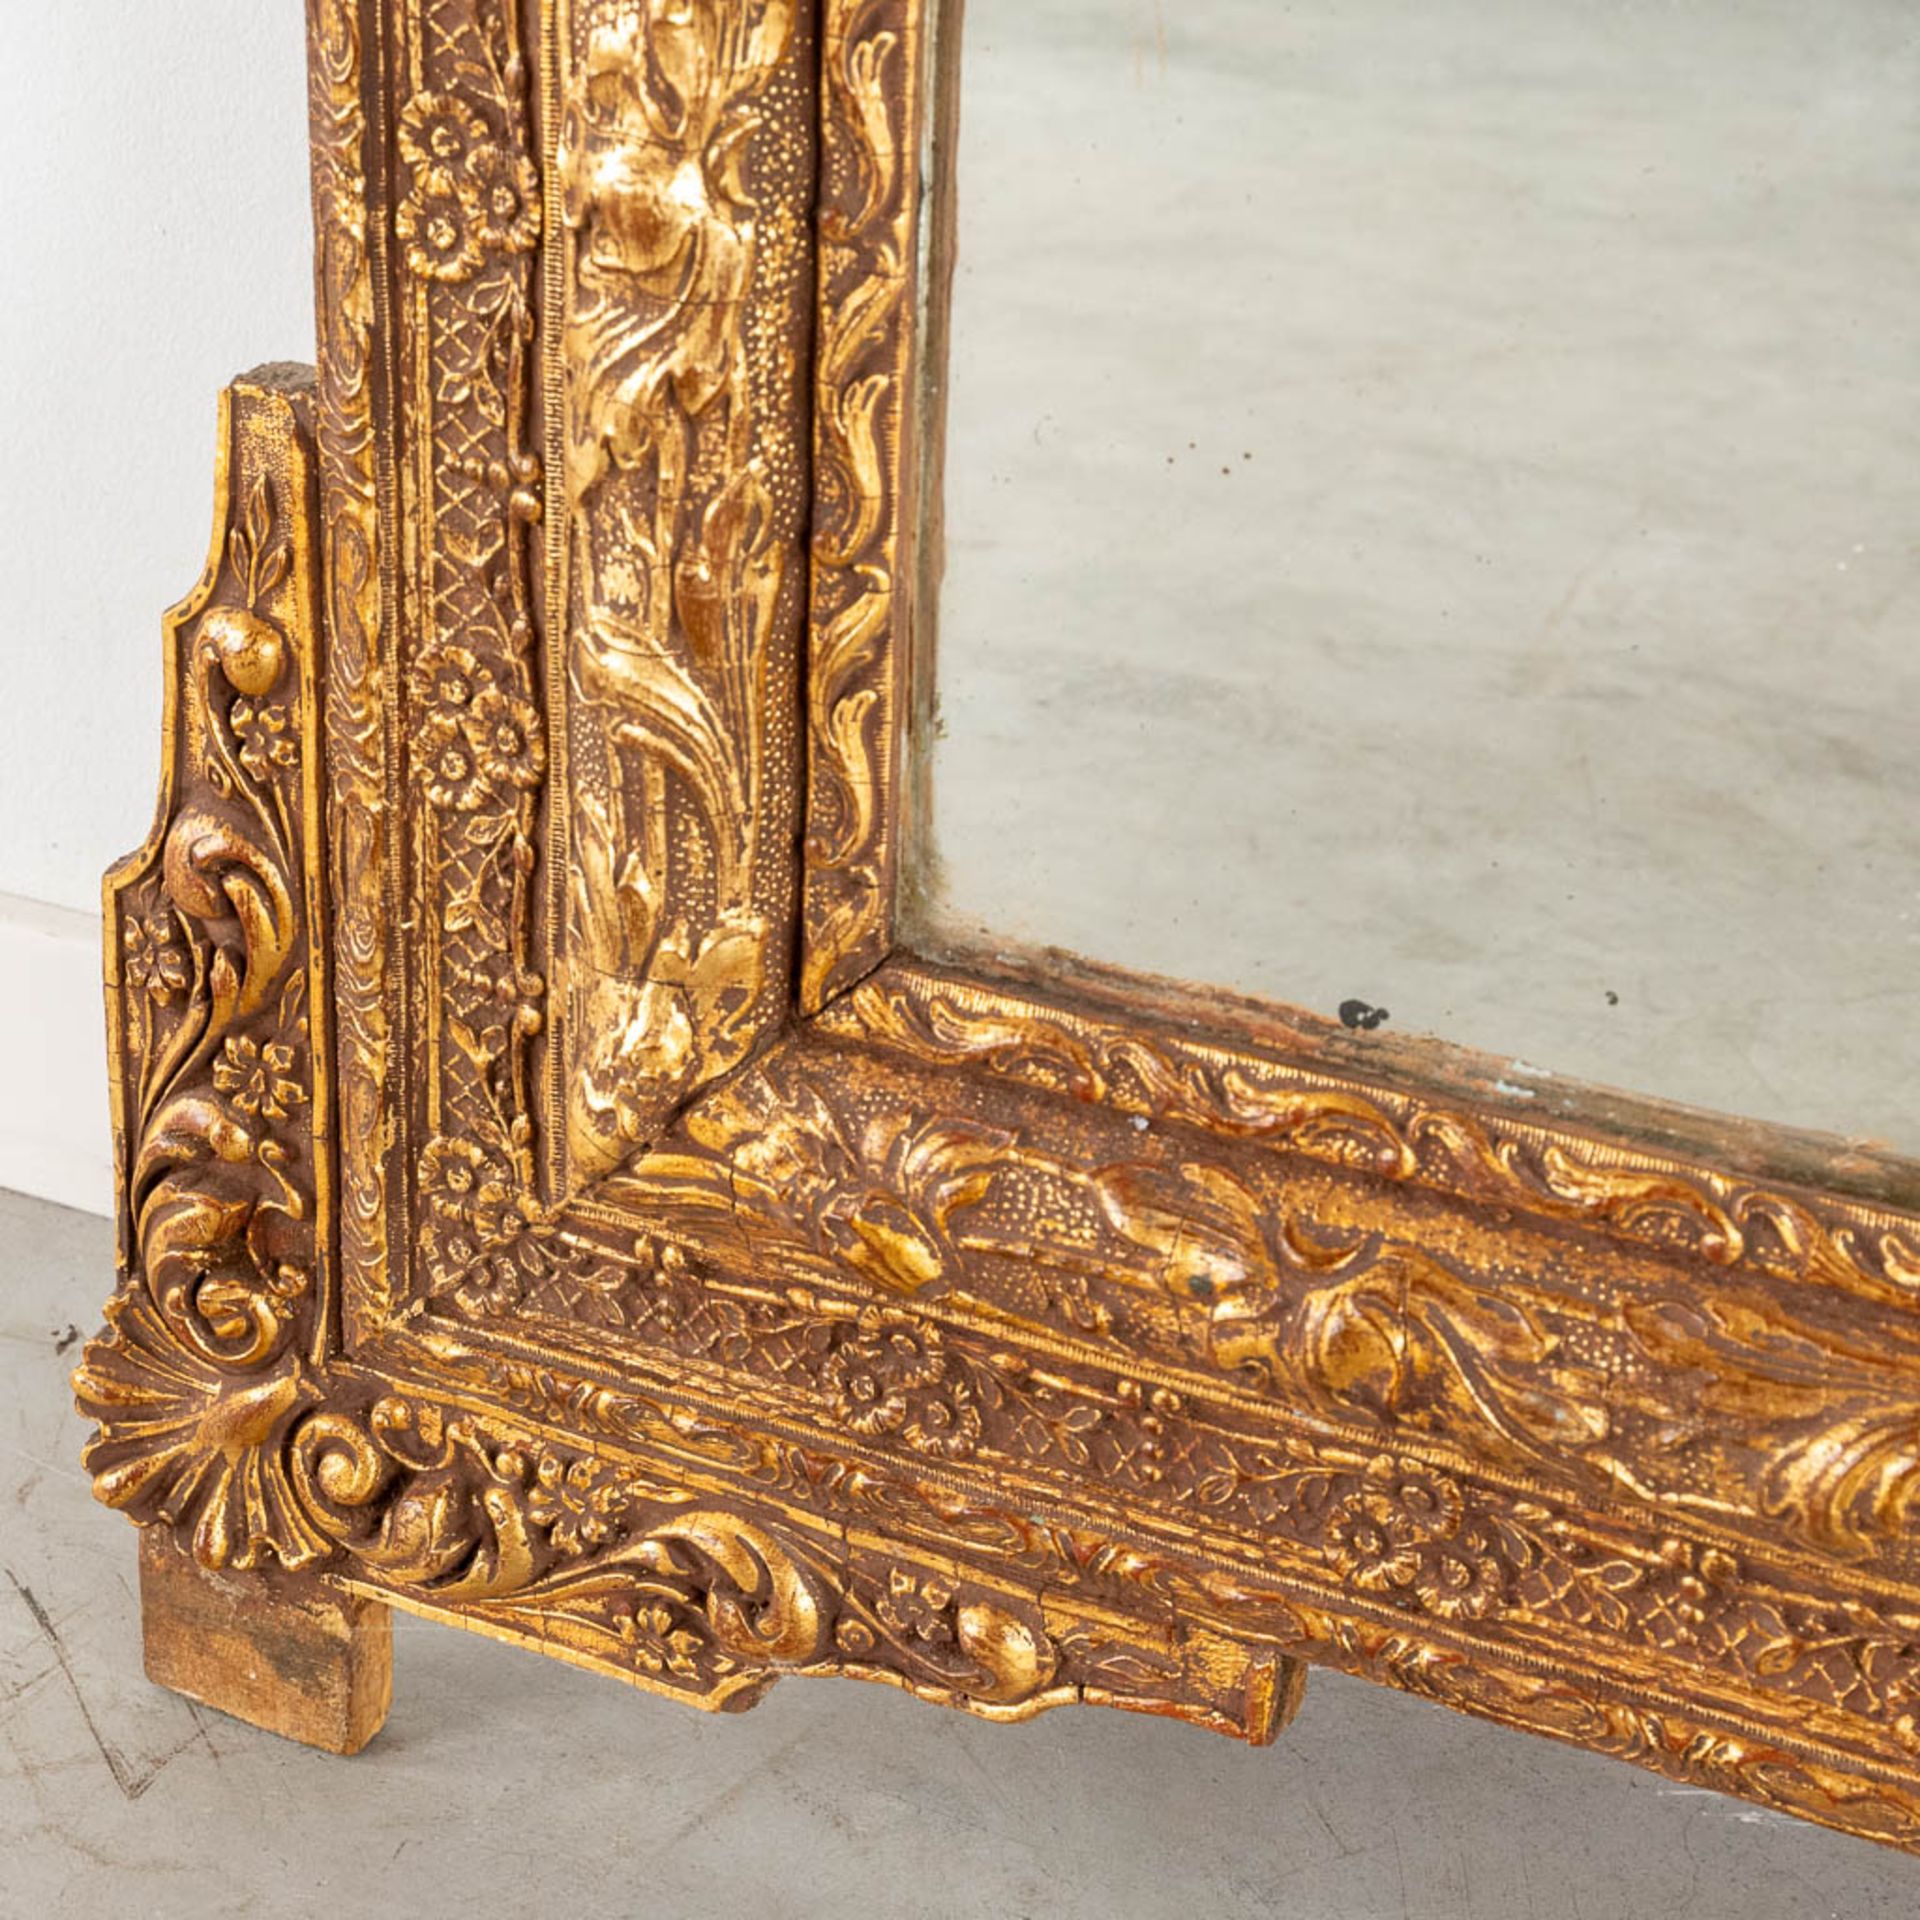 A mirror, sculptured wood and gilt stucco. Circa 1900. (W:135 x H:85 cm) - Image 7 of 8